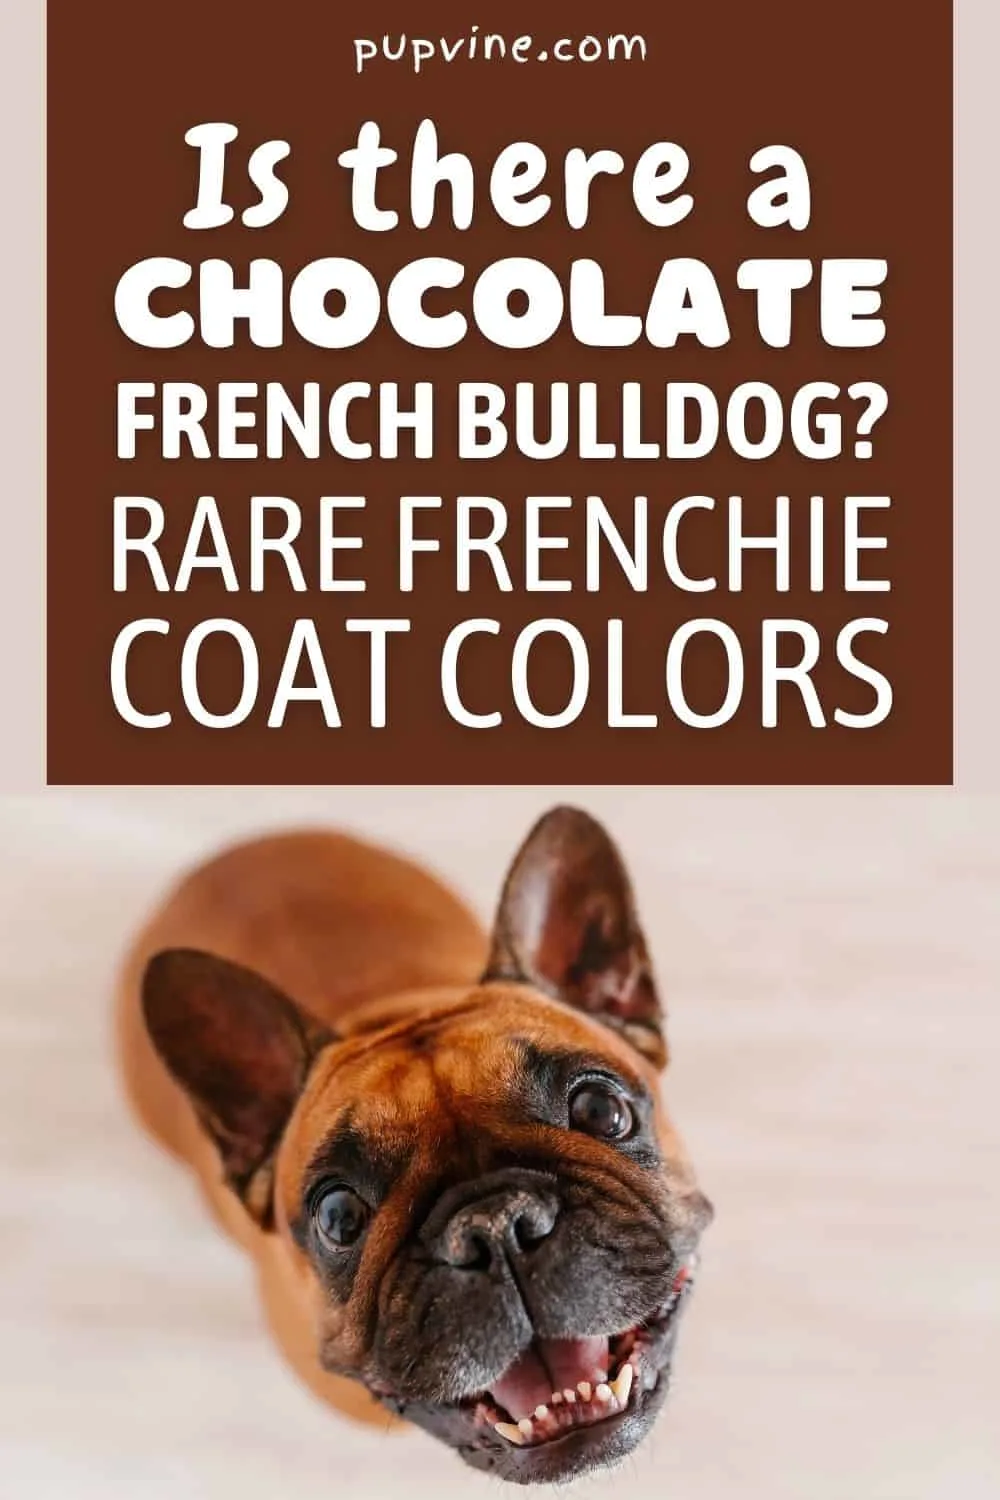 Is There A Chocolate French Bulldog? Rare Frenchie Coat Colors